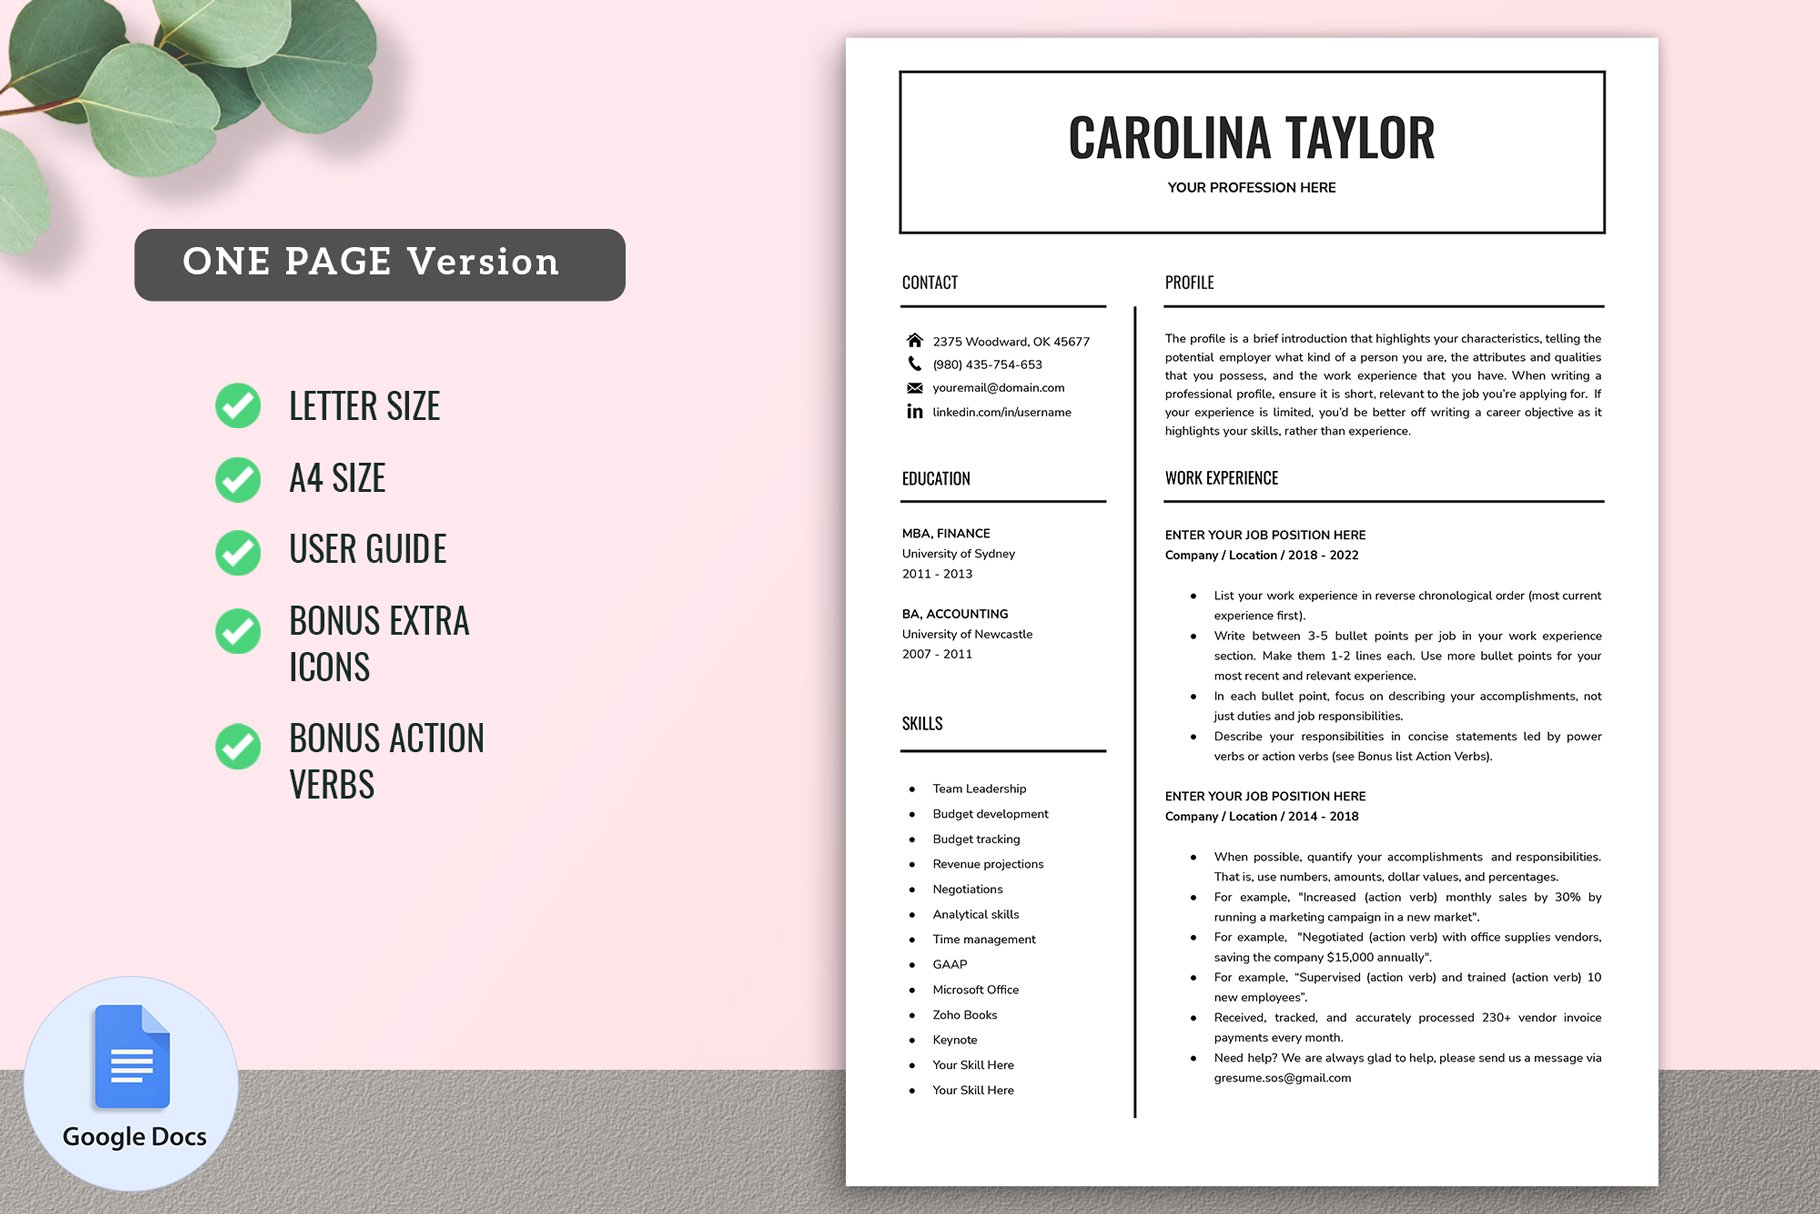 Google Docs Resume Template 01 preview image.